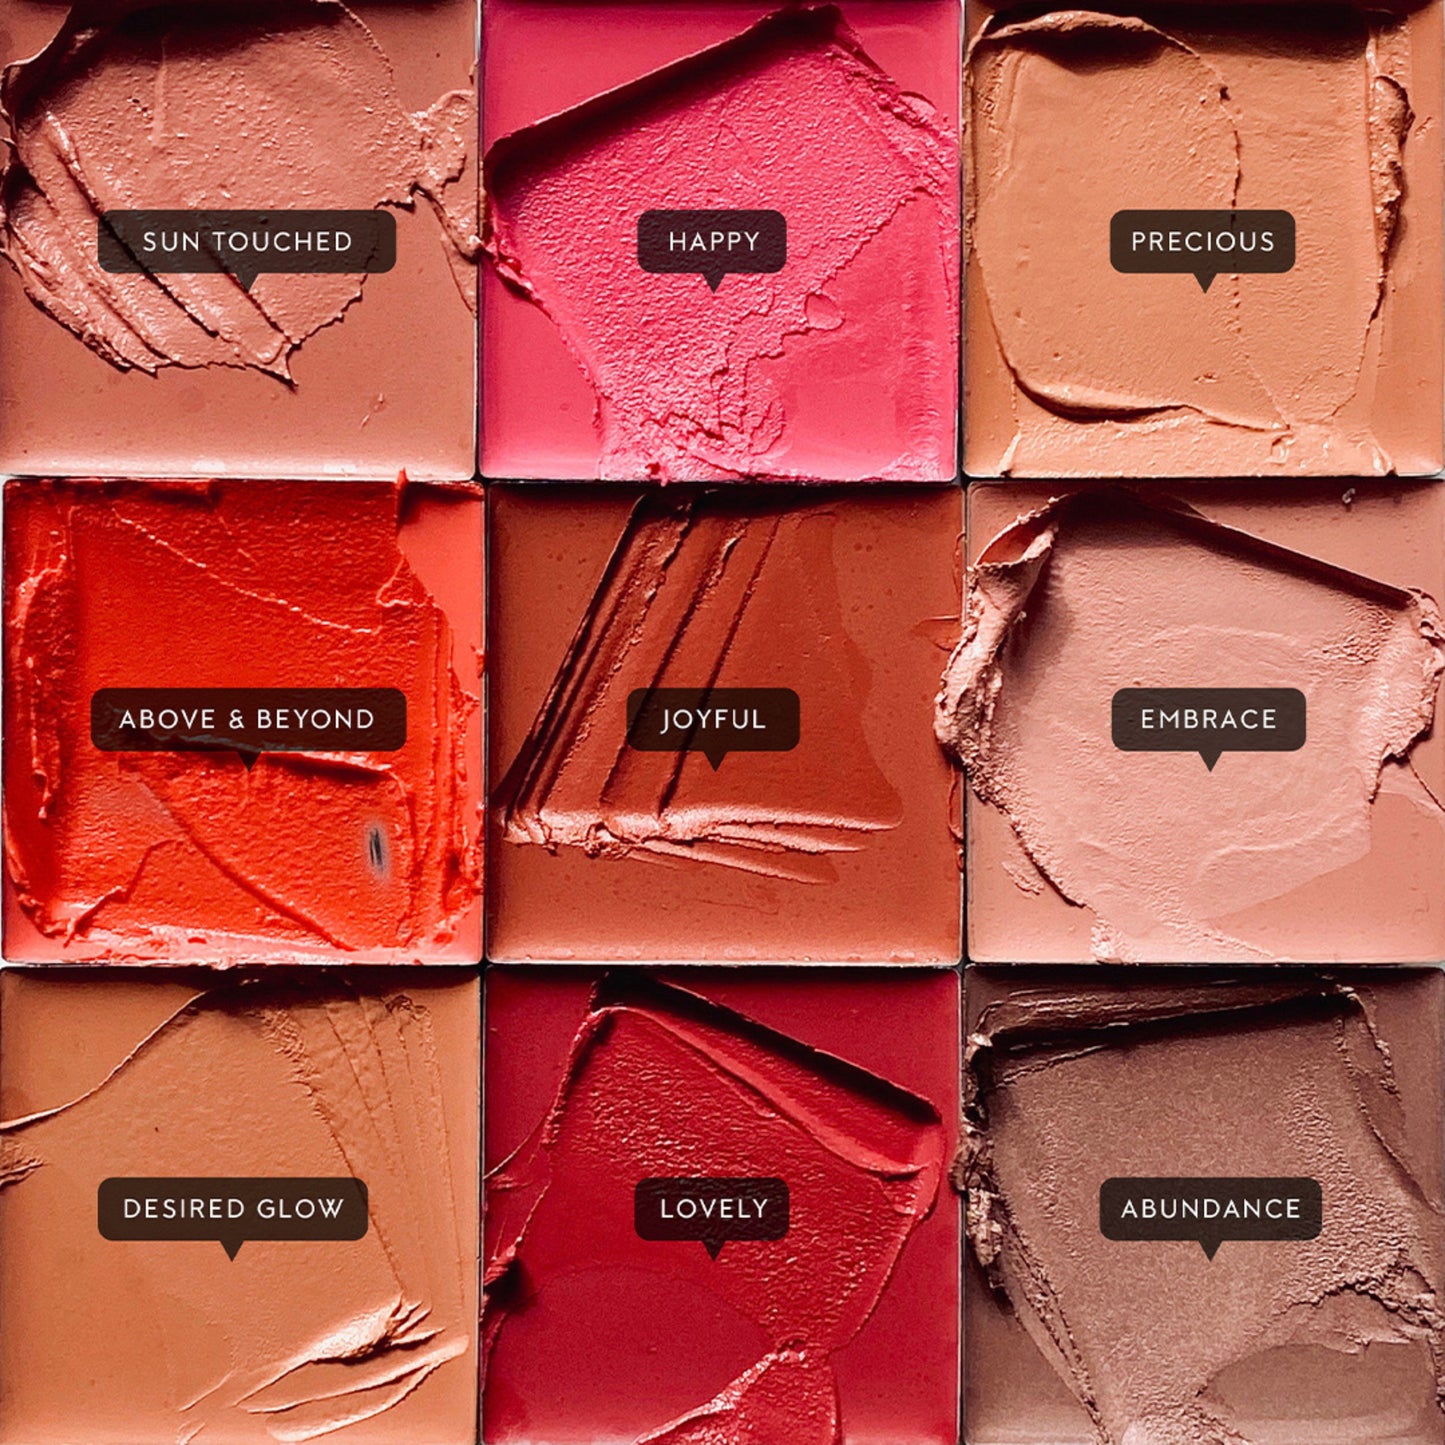 Nine different shades of cream blush. Sun Touched is a soft coral shade.